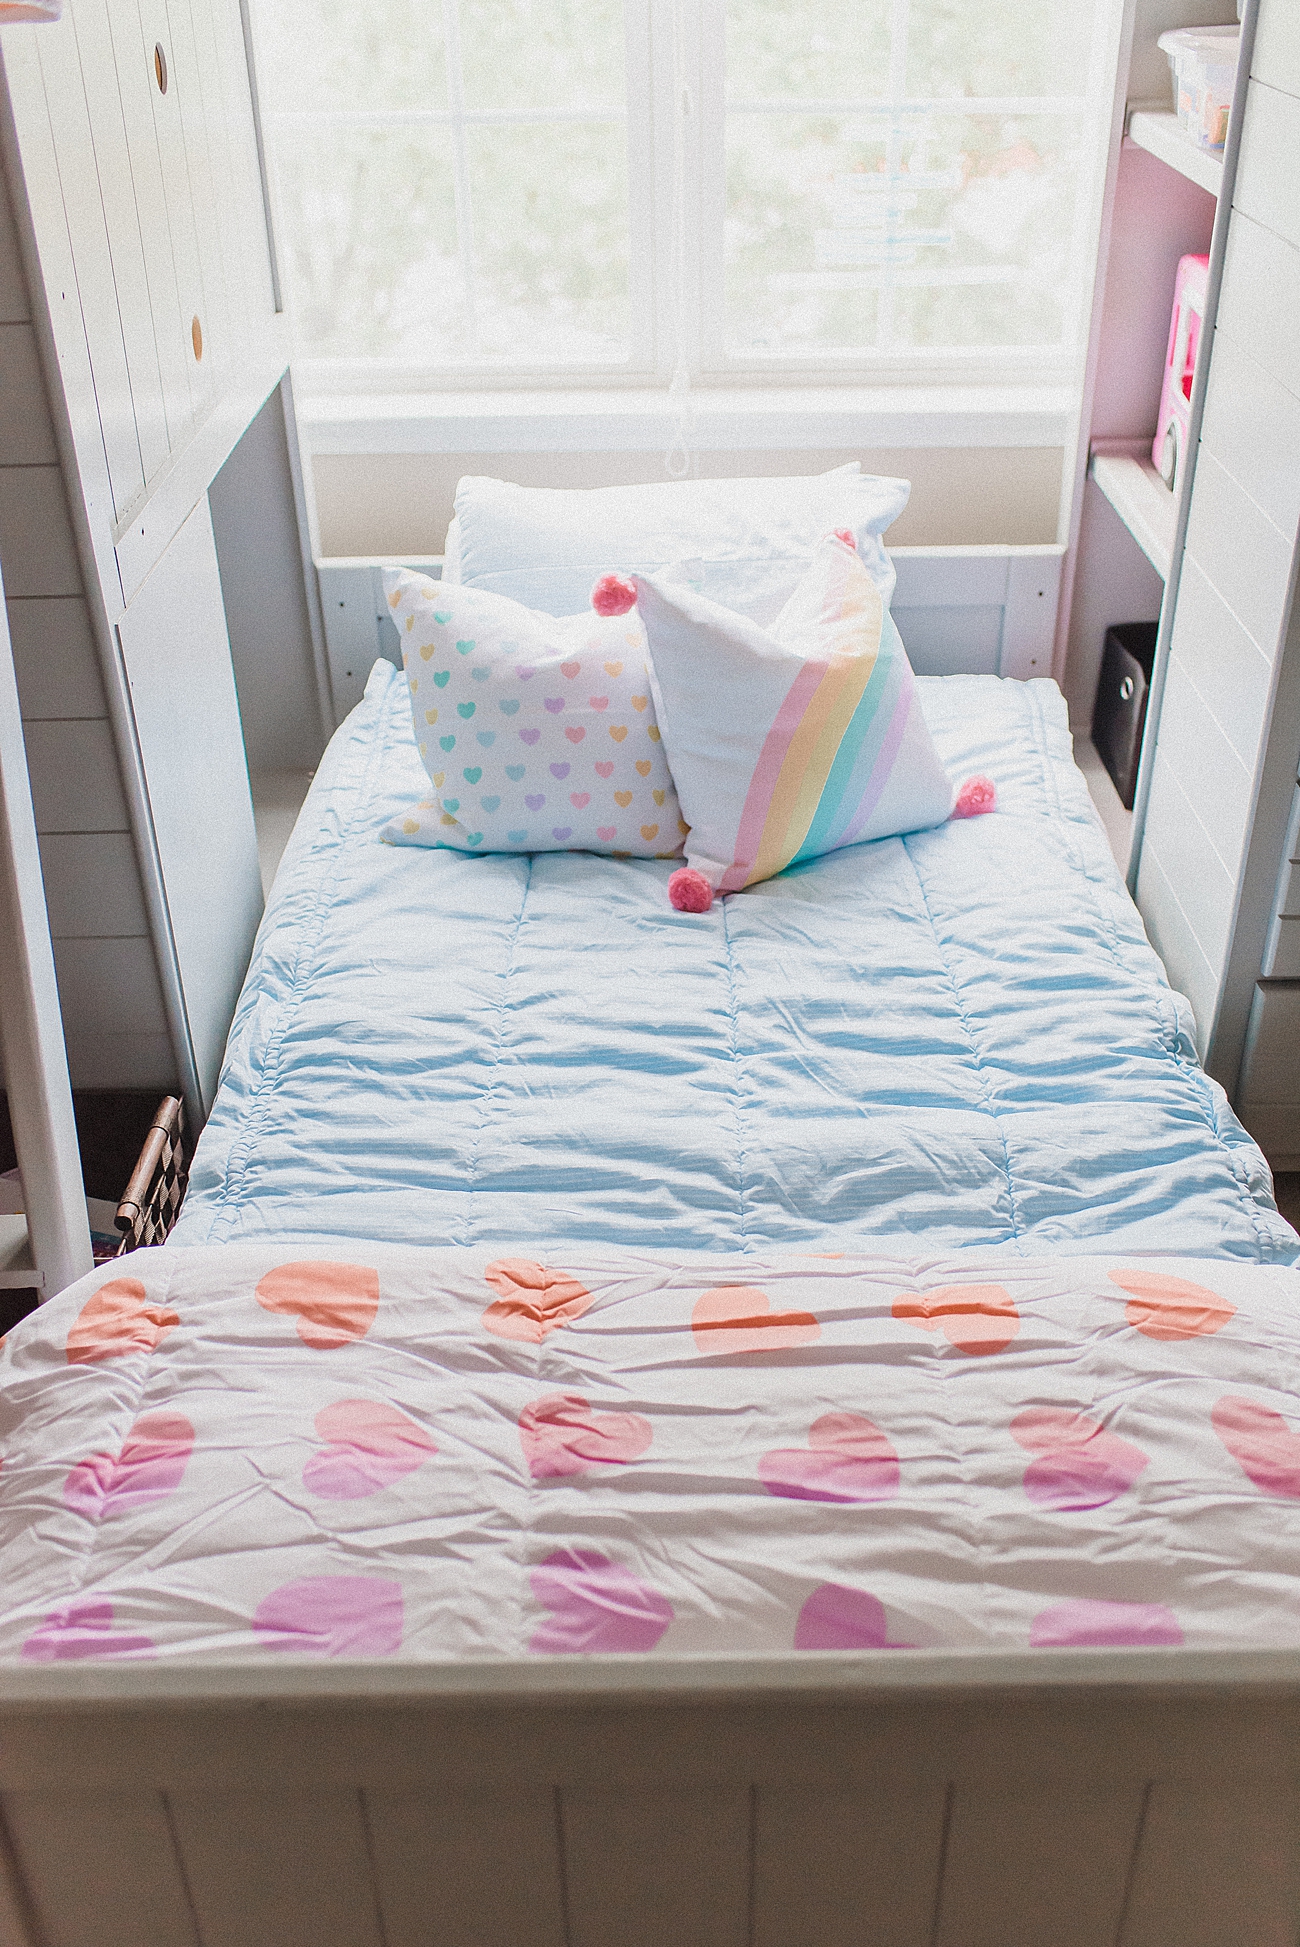 The Best Bedding for Bunk Beds | Beddy's Review